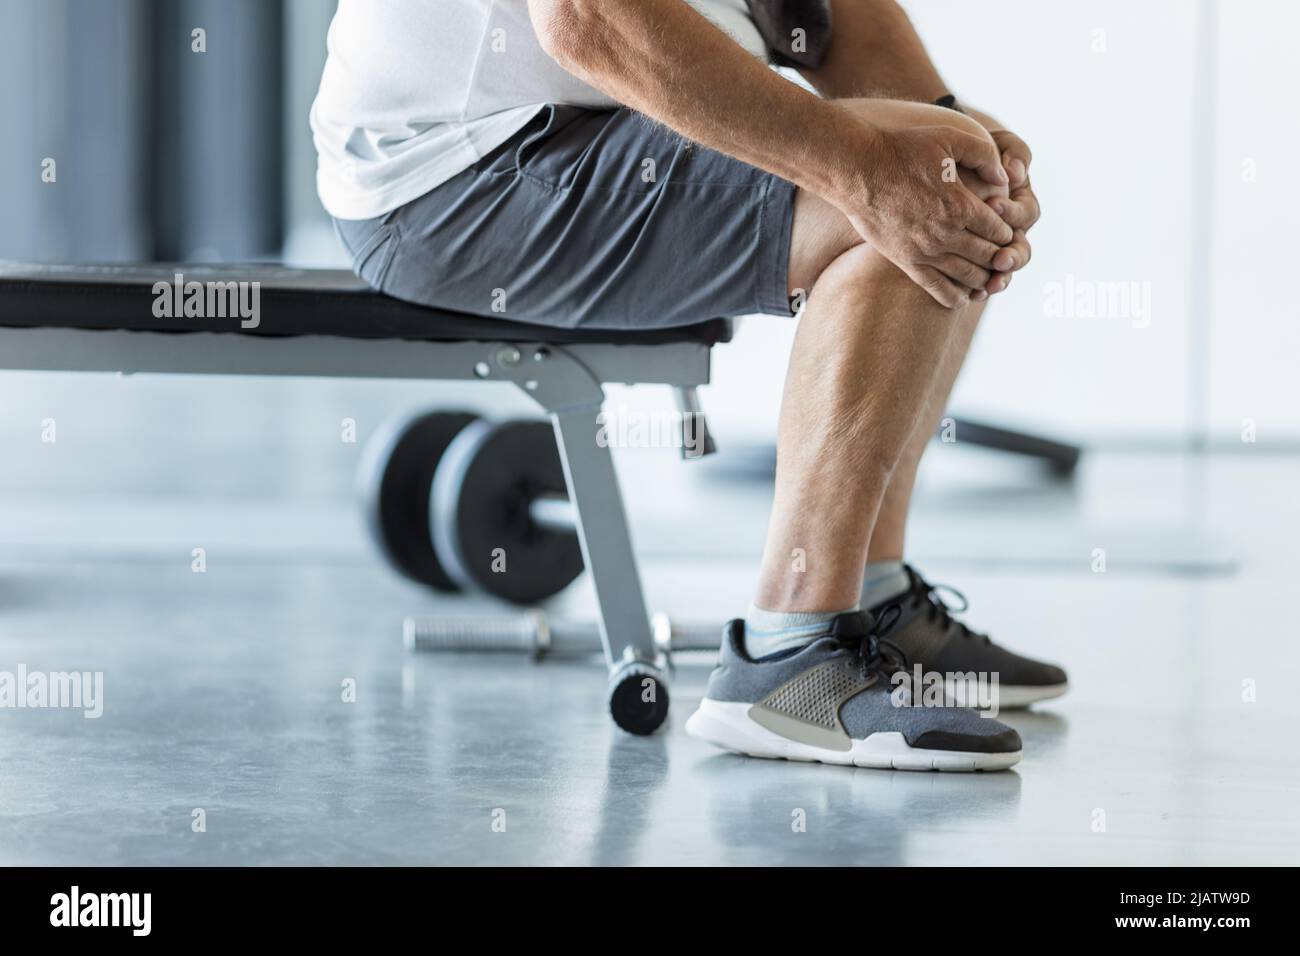 Active senior man in gym with knee injury Stock Photo